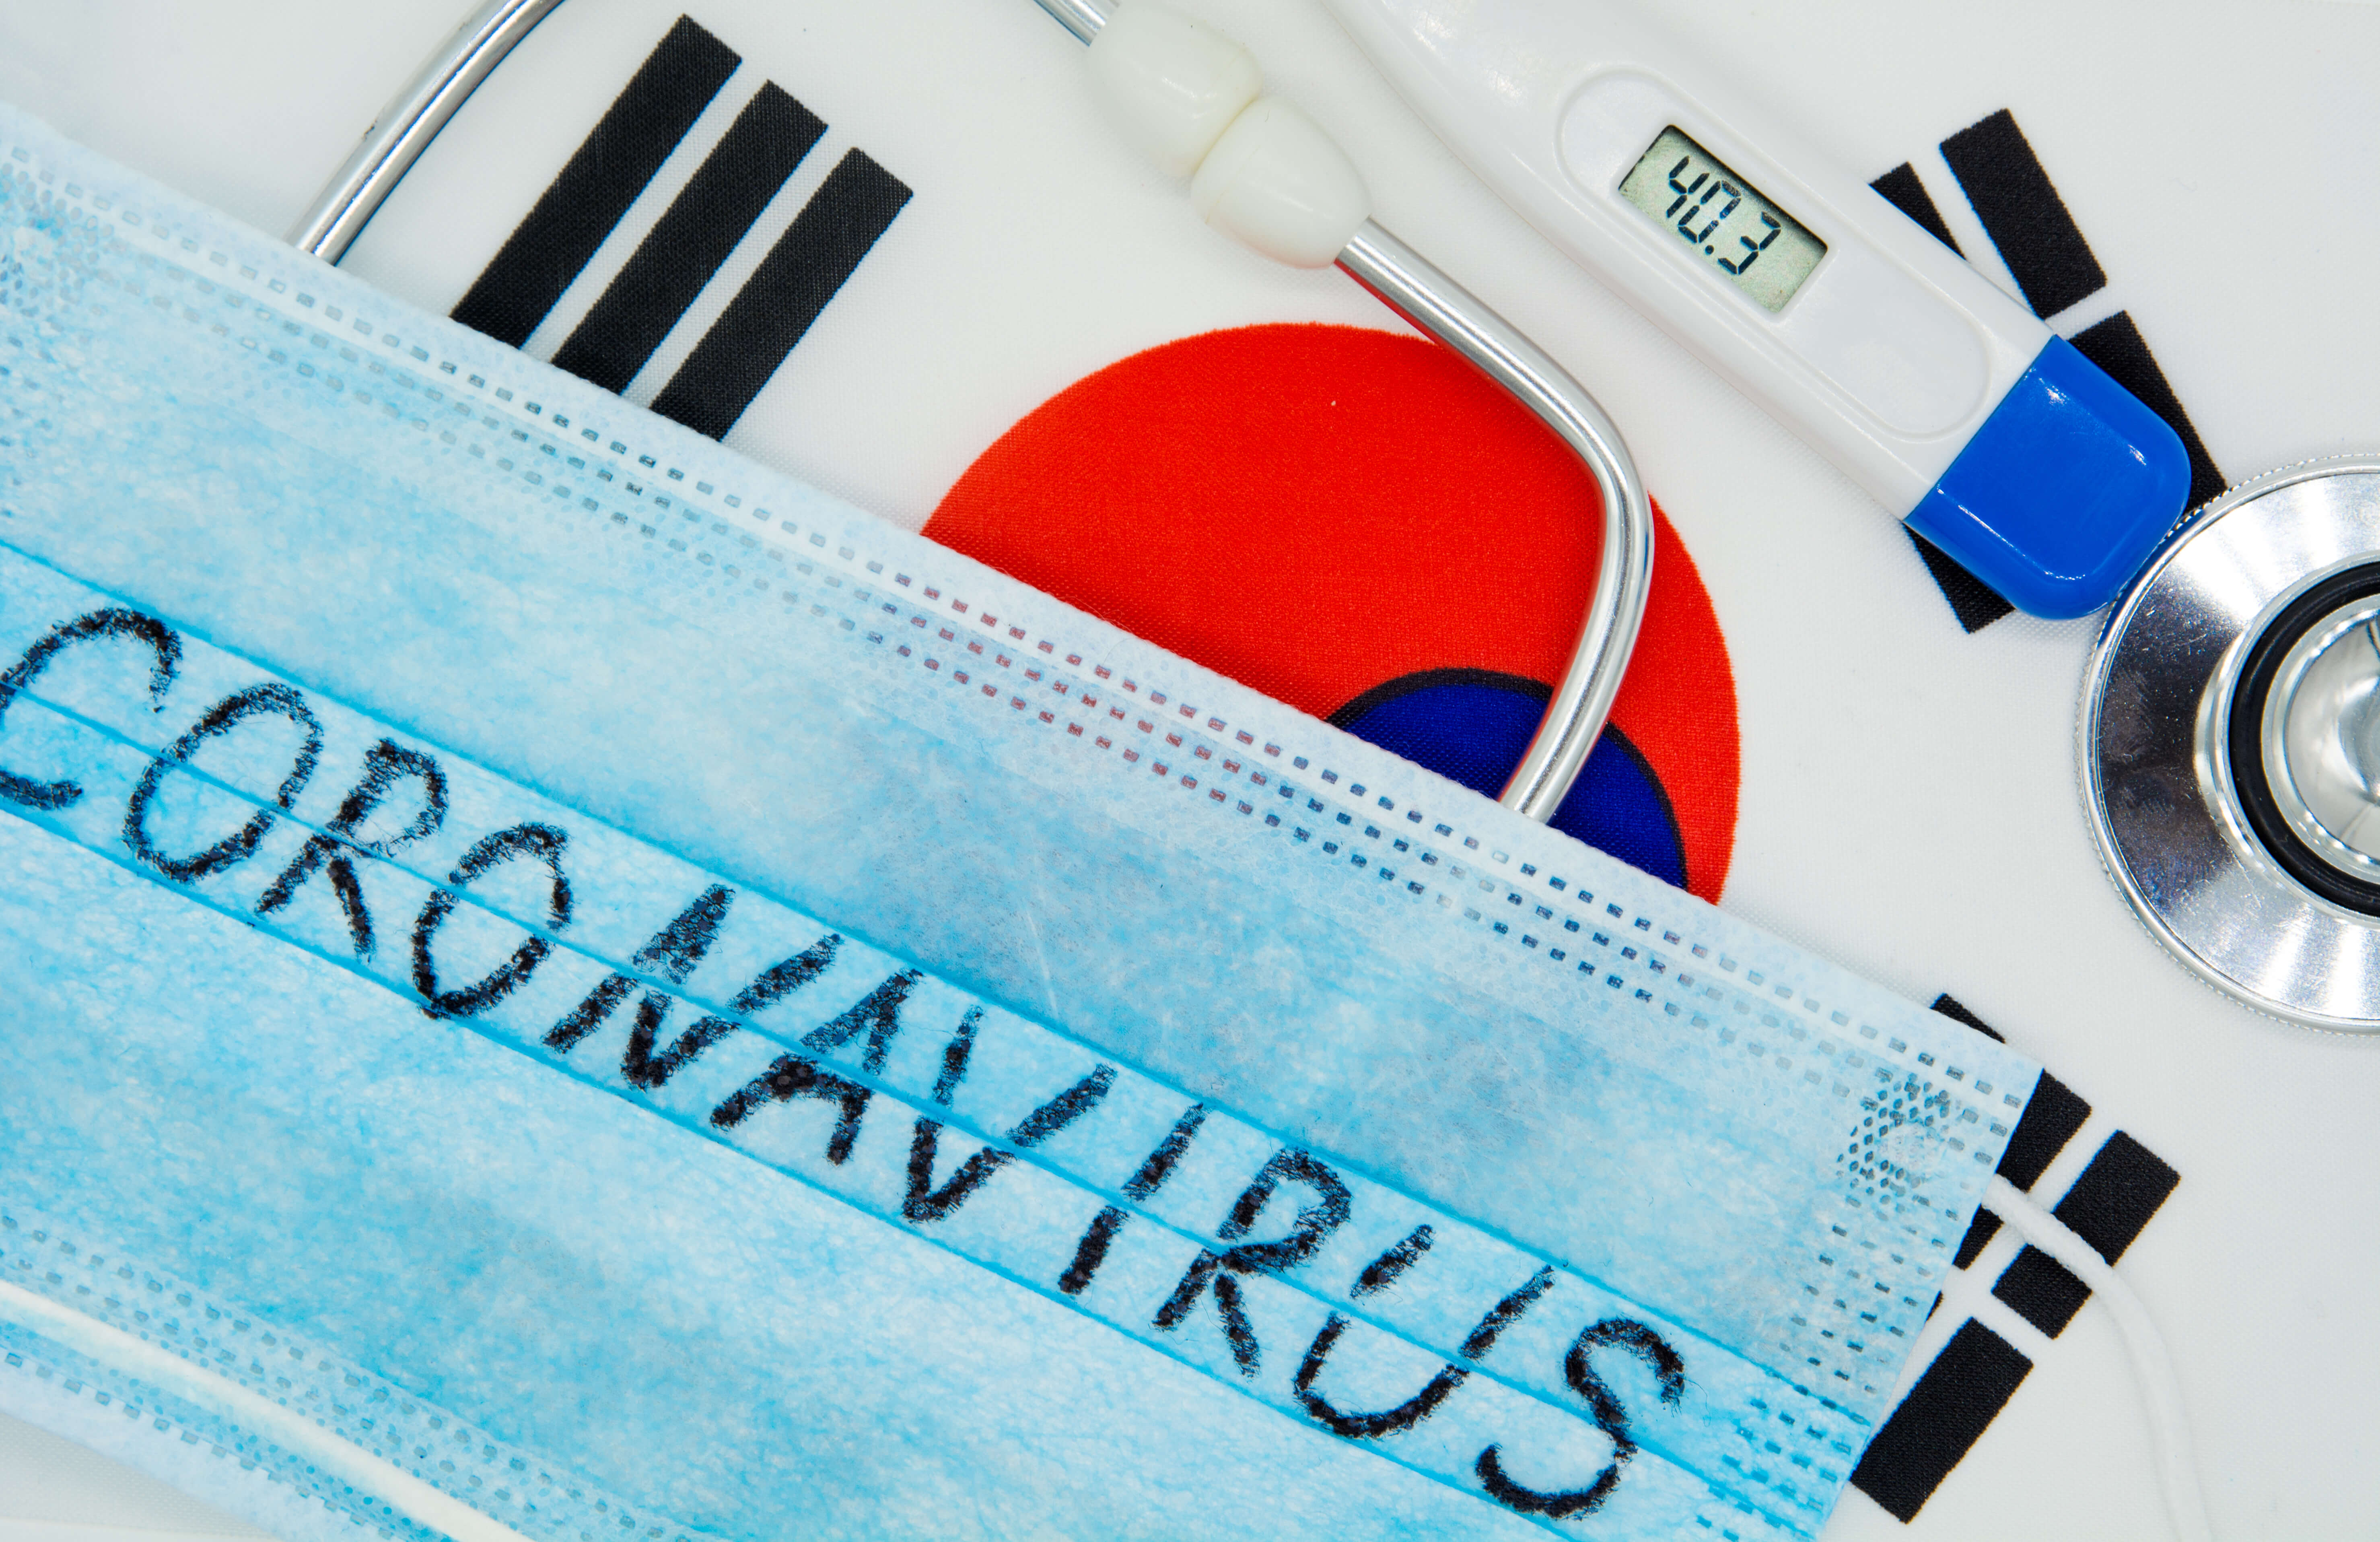 FinanceBrokerage - Economic News: tocks in South Korea fell following fears over the coronavirus pandemic that continues to weigh on investor sentiments.